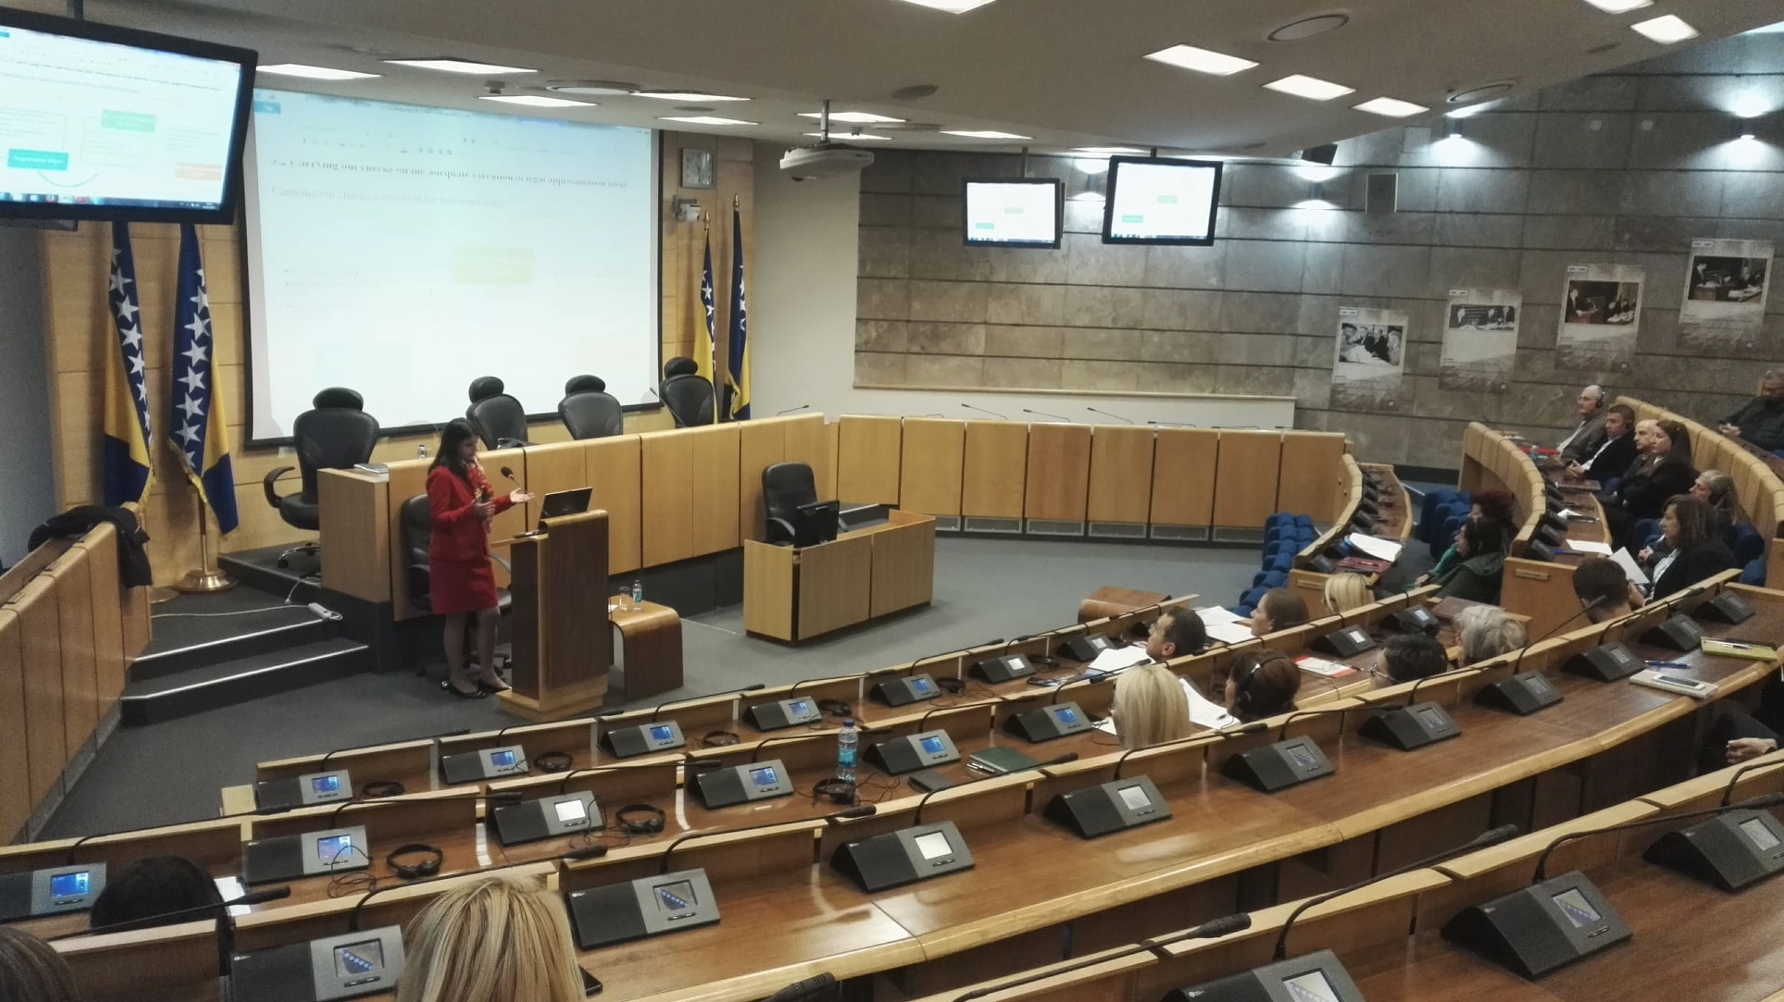 The Twinning Project facilitated coaching and on-the-job training events for all four BiH Parliaments staff